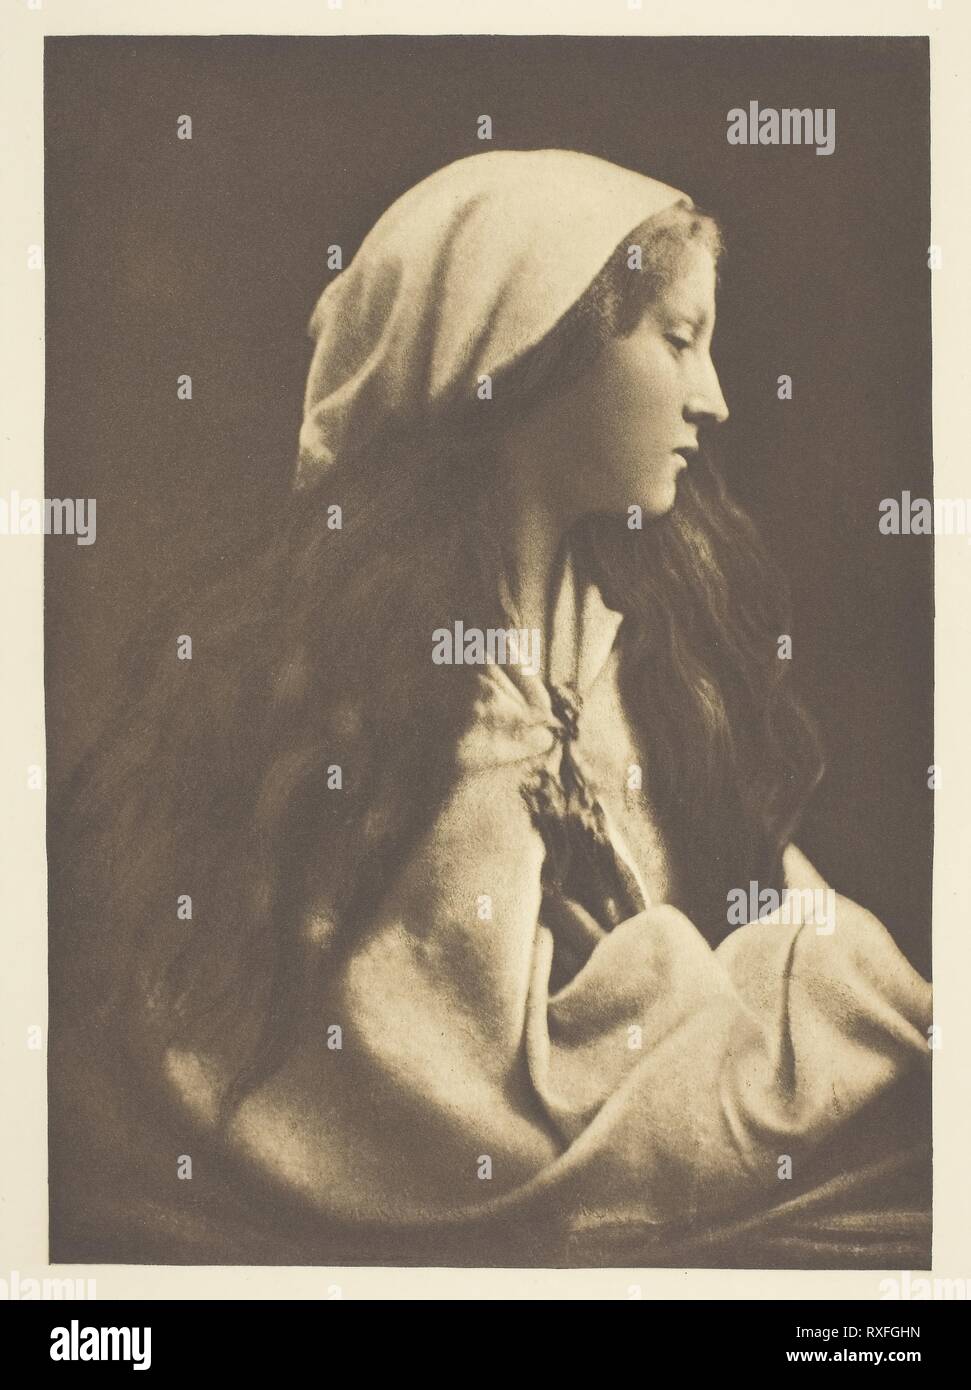 The Day Dream. Julia Margaret Cameron; English, 1815-1879. Date: 1869. Dimensions: 21.6 × 15.5 cm (image); 38 × 28.2 cm (paper). Photogravure, from 'Sun Artists, Number 5' (1890). Origin: England. Museum: The Chicago Art Institute. Stock Photo